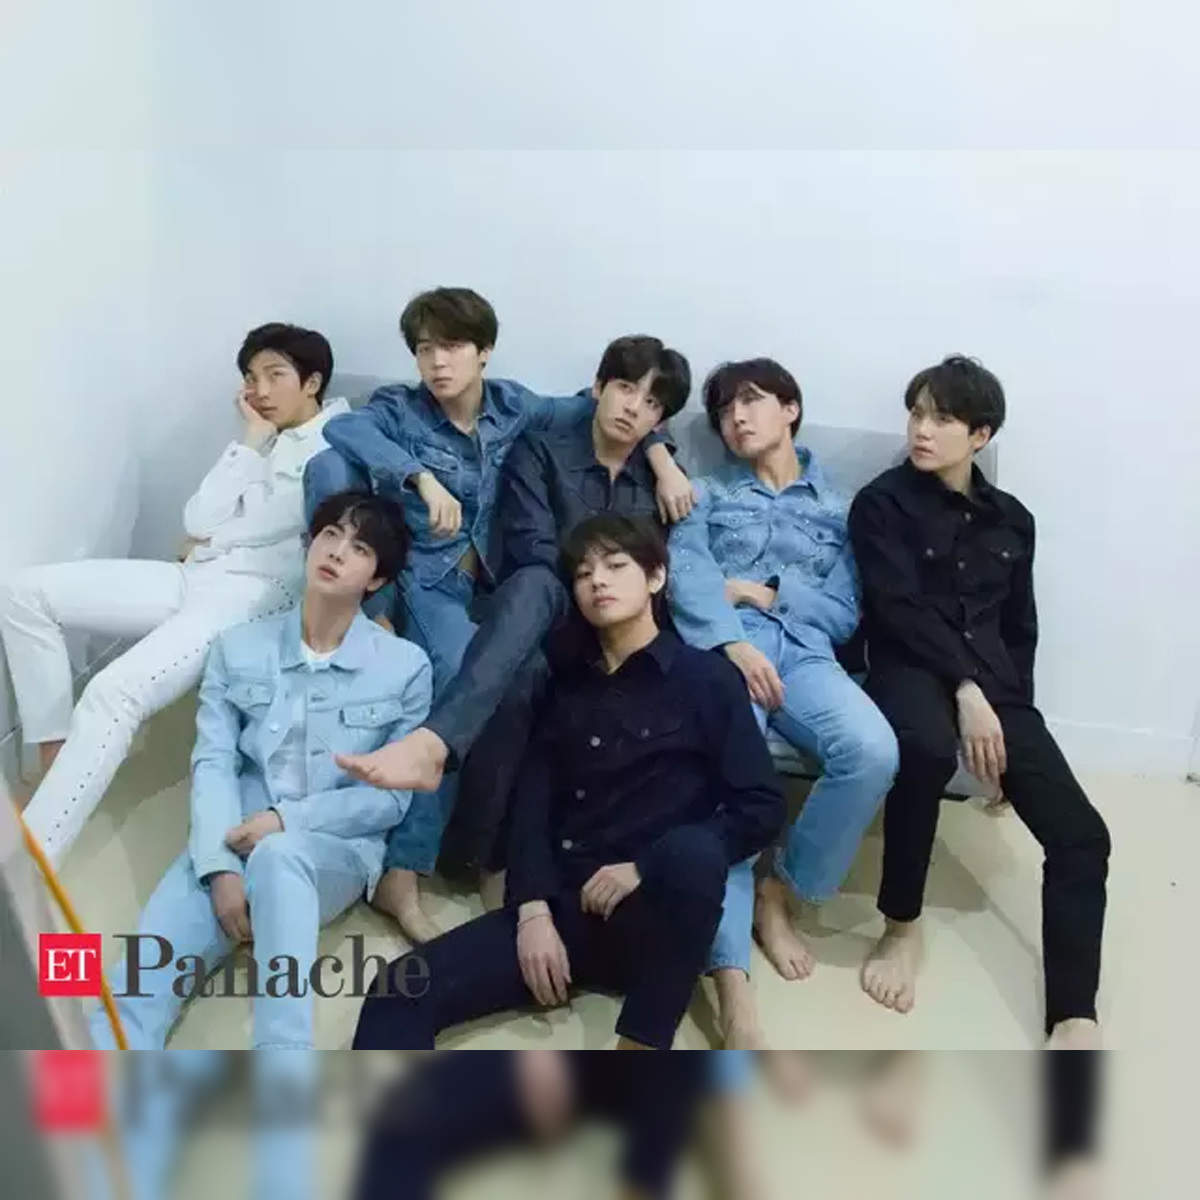 https://img.etimg.com/thumb/width-1200,height-1200,imgsize-224726,resizemode-75,msid-79402955/magazines/panache/bts-make-history-become-first-k-pop-group-to-earn-grammy-nomination-in-major-category.jpg